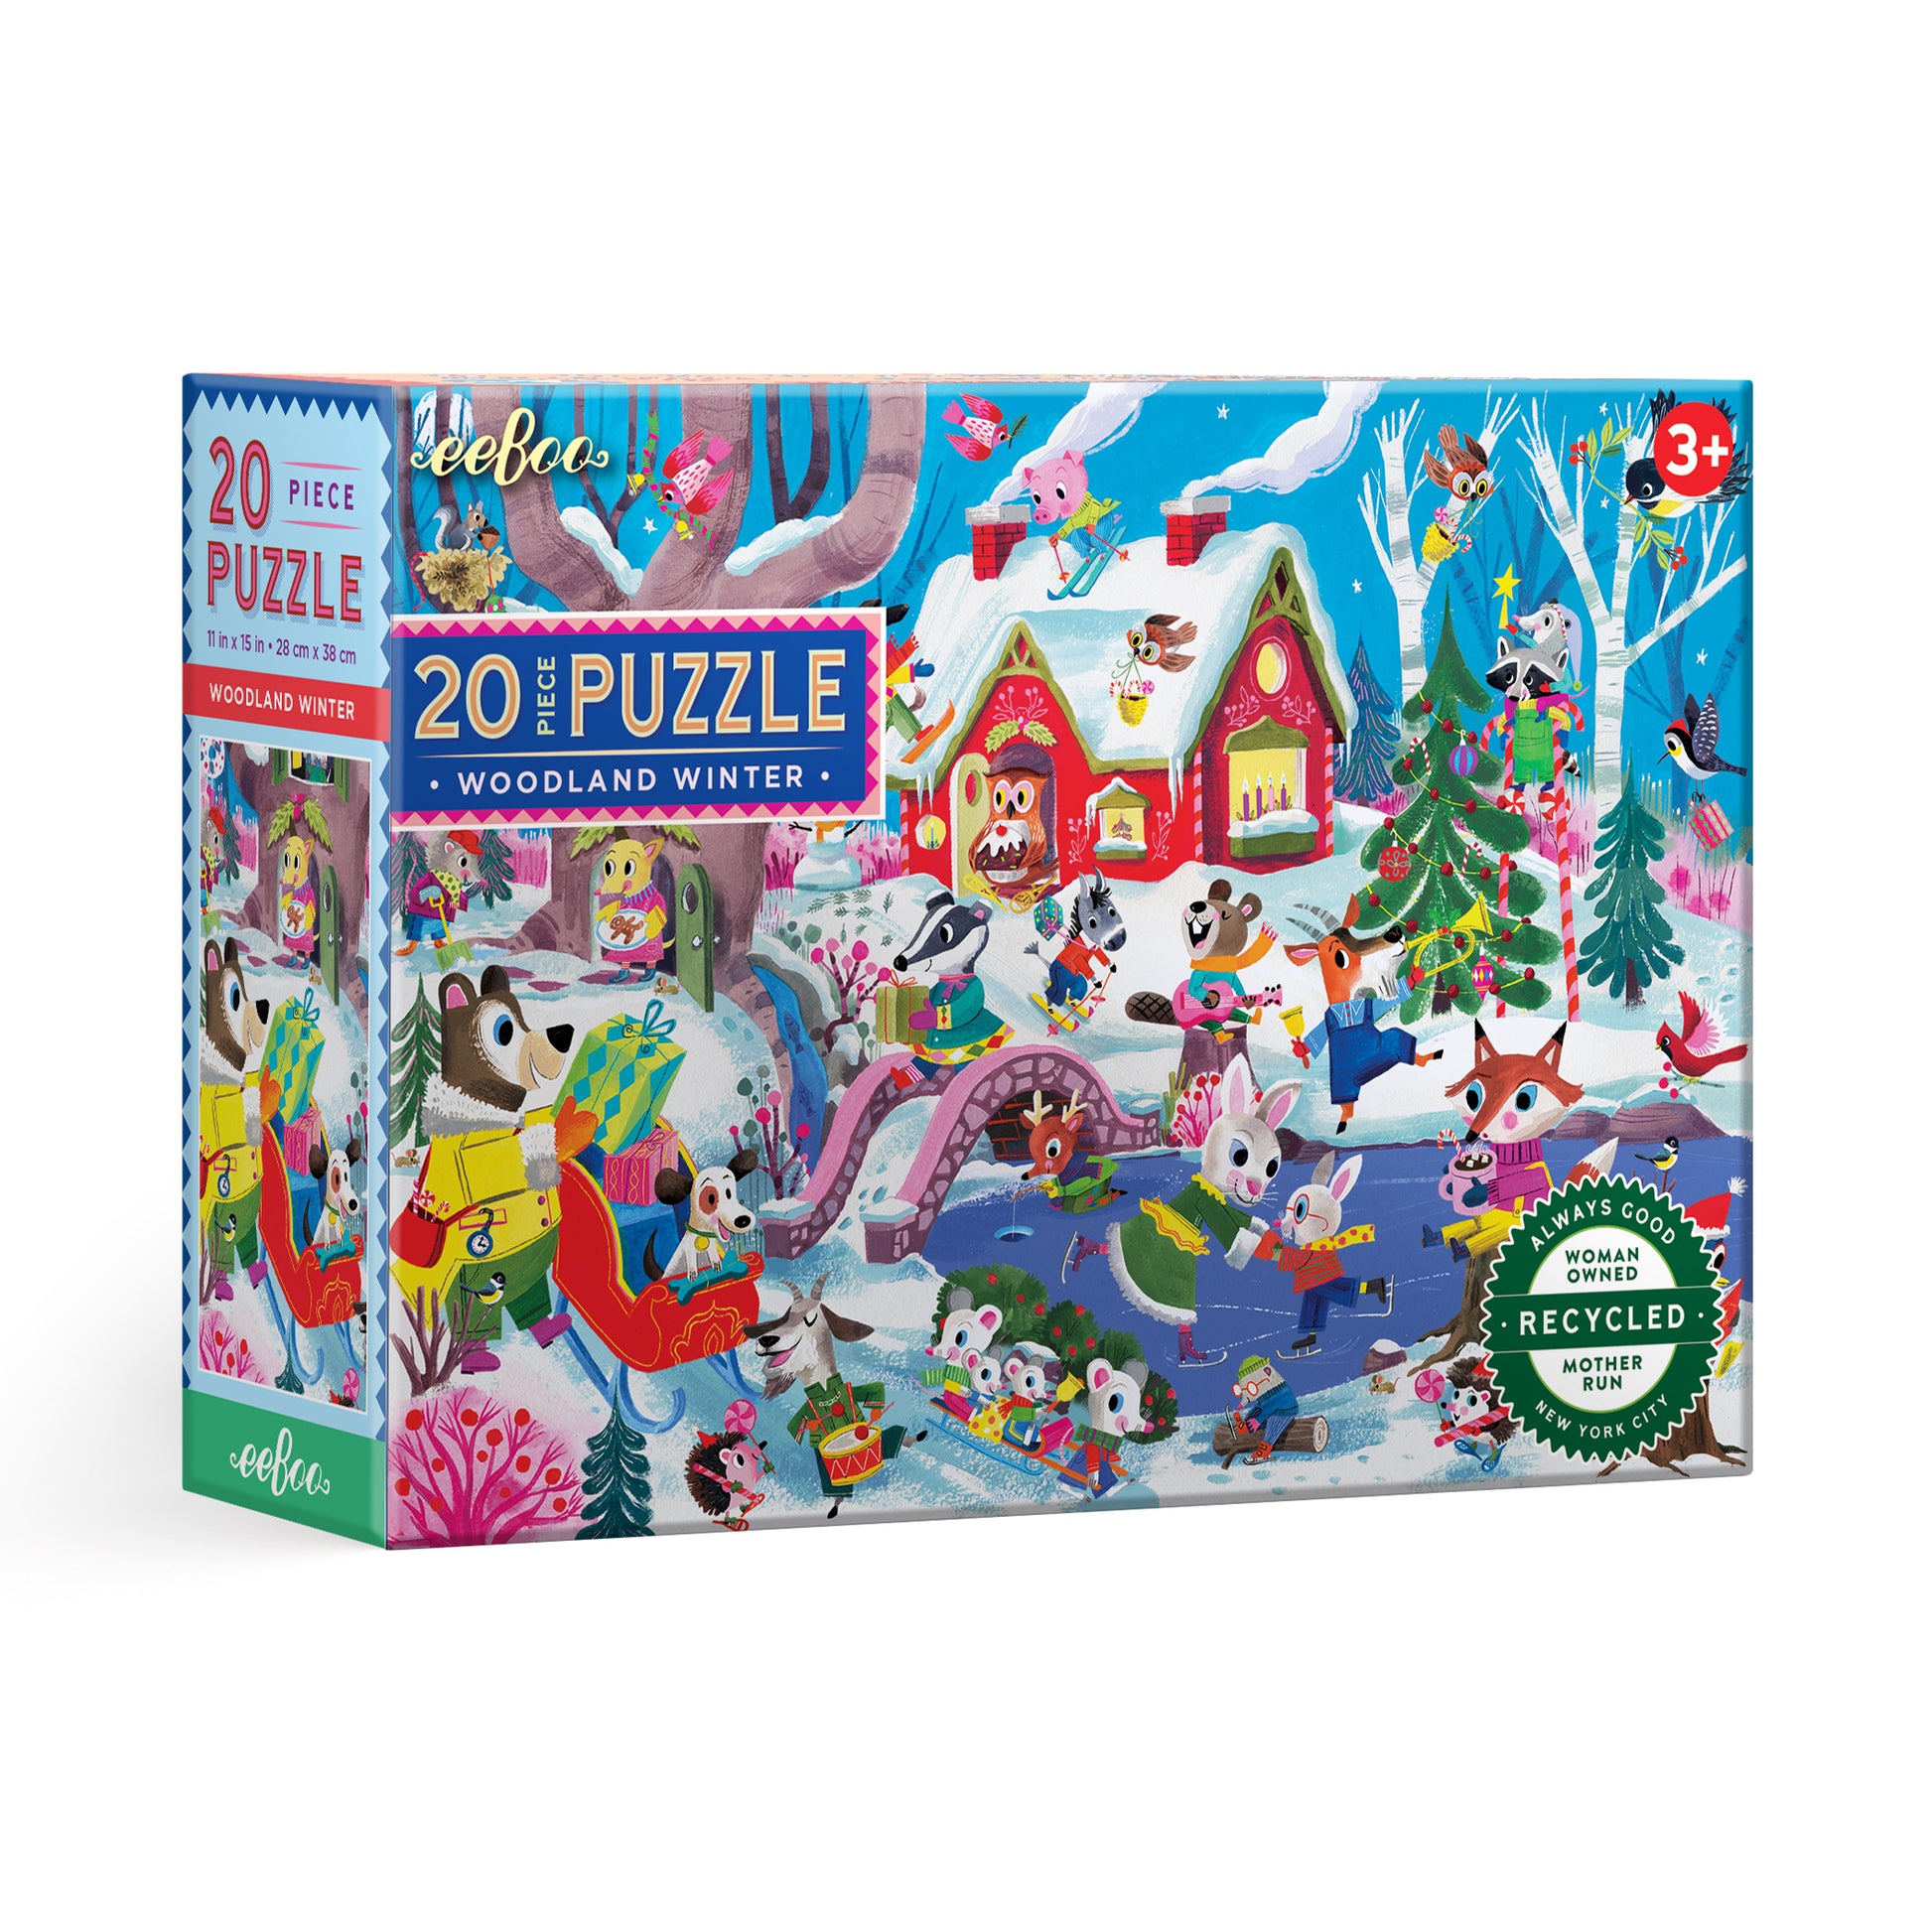 Woodland Winter 20 Piece Puzzle | Unique Fun Gifts for Kids Ages 3+